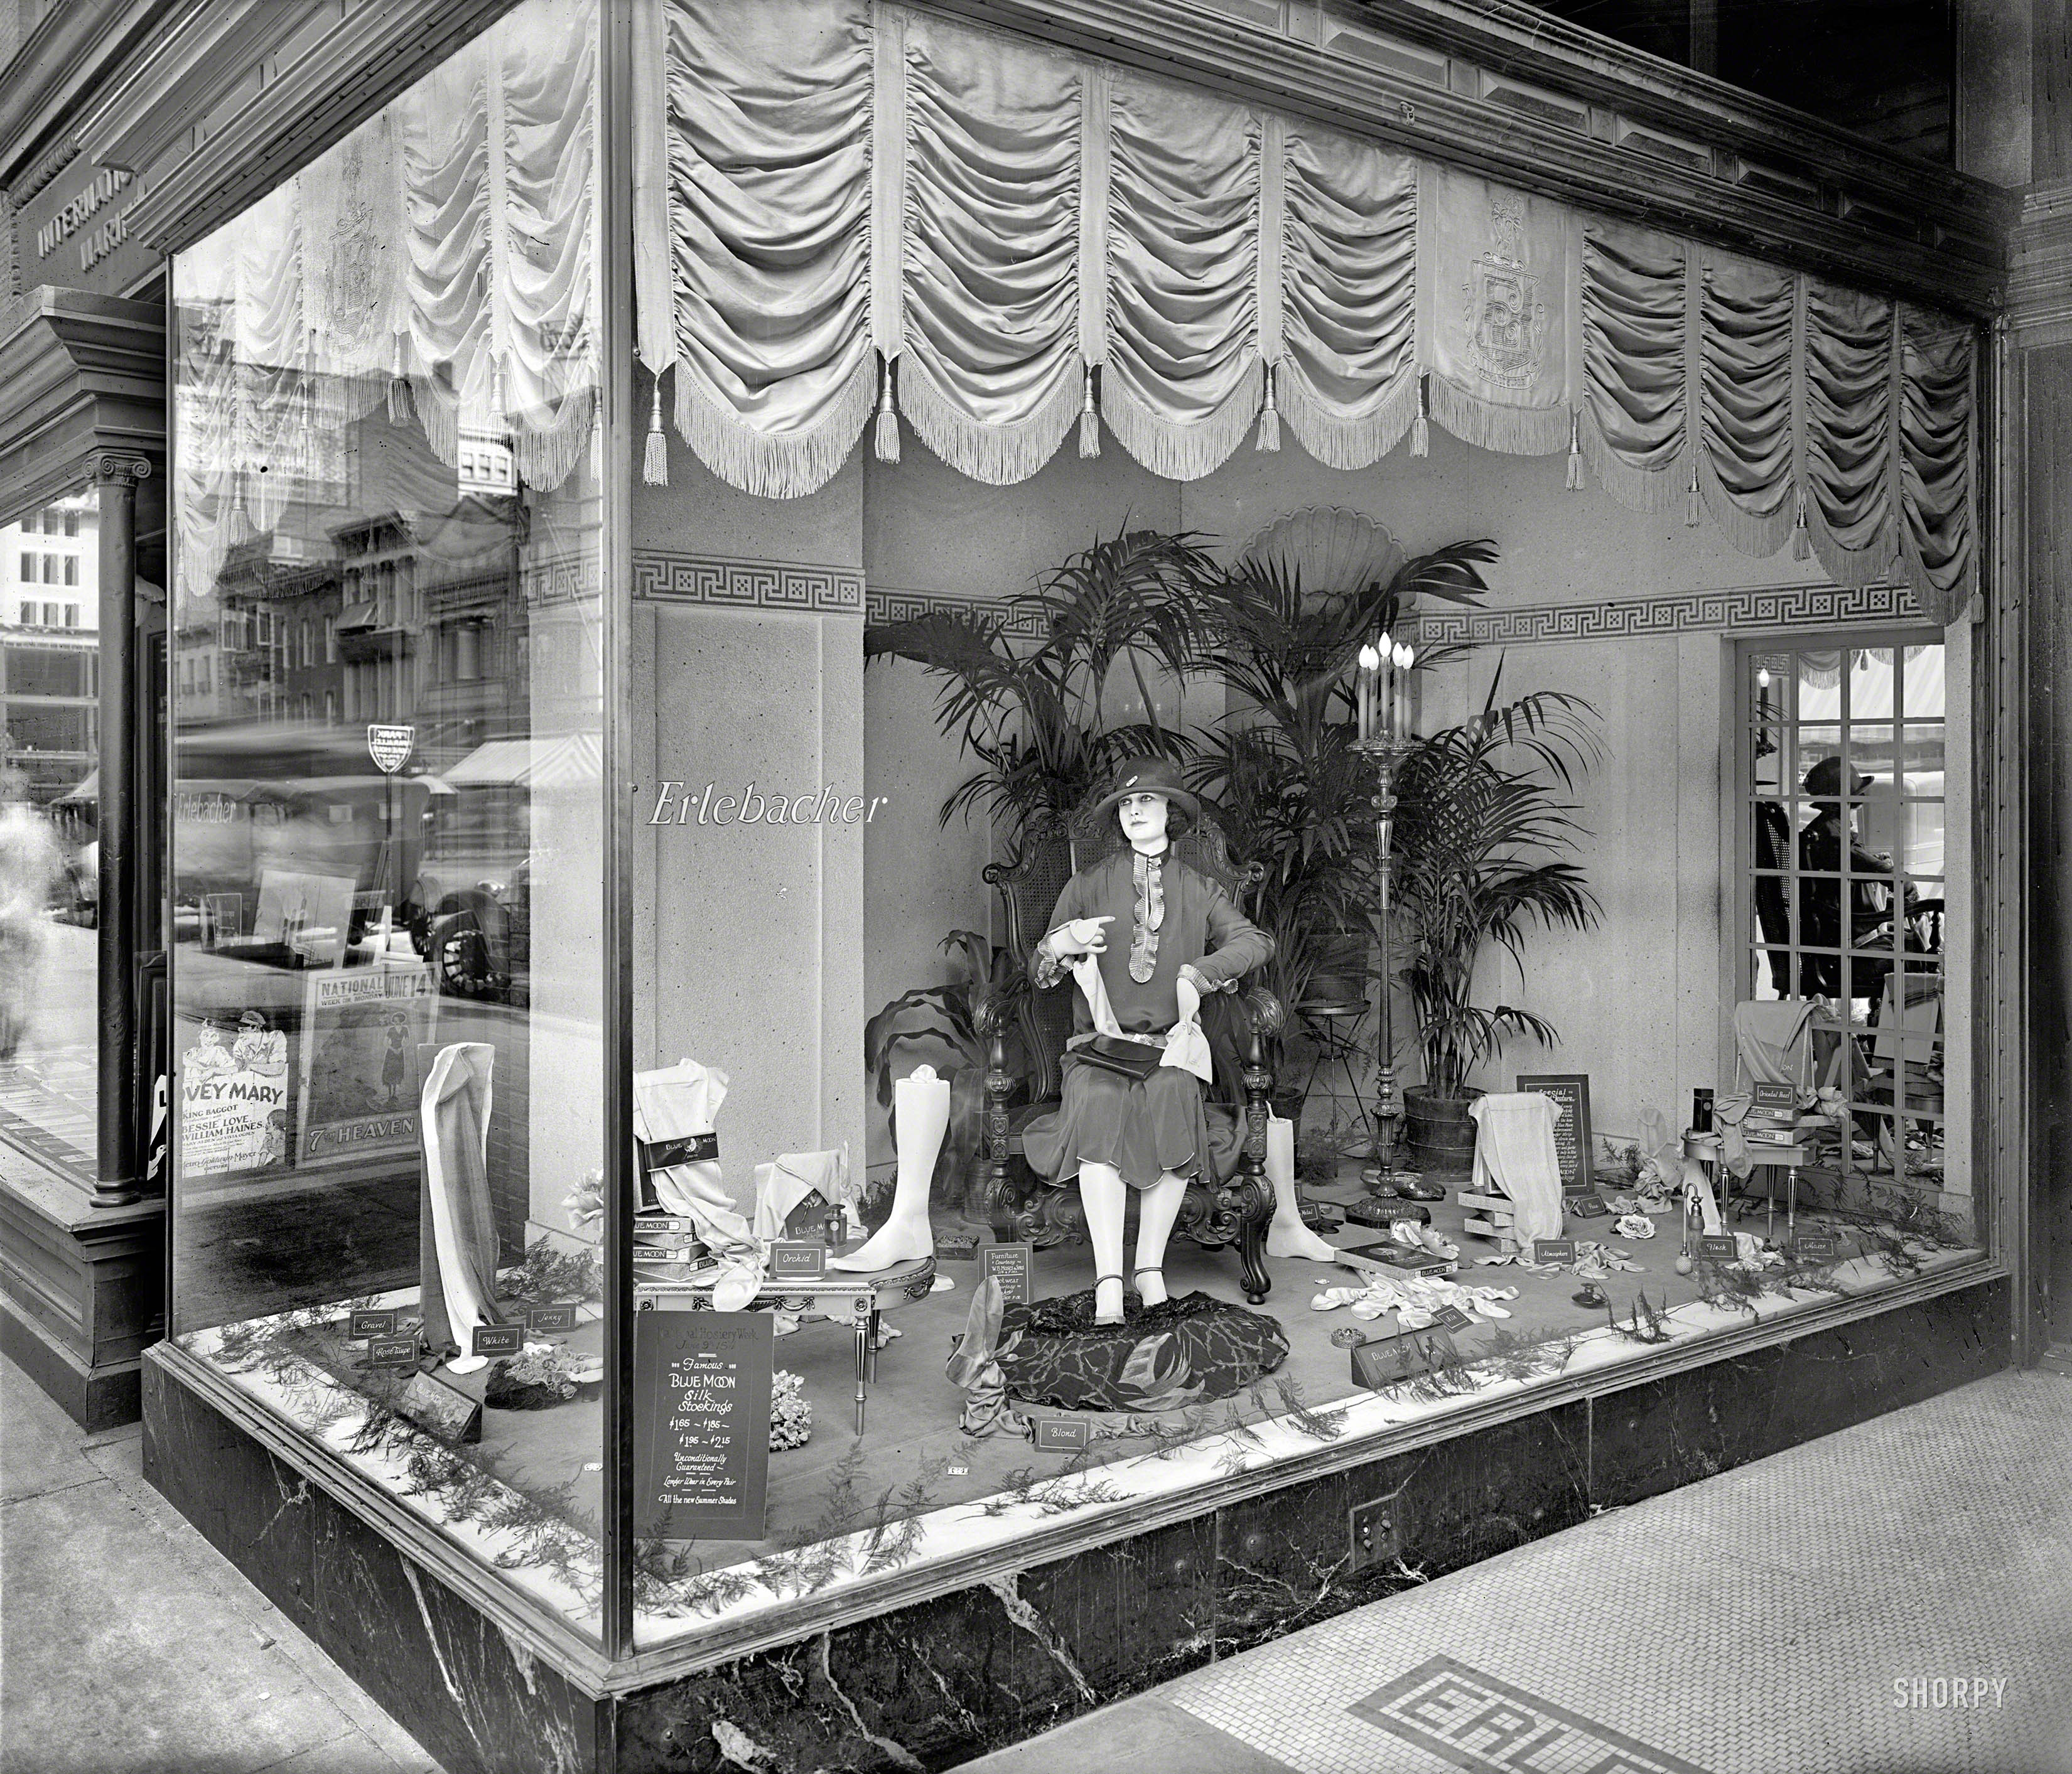 Washington, D.C., 1926. "National Hosiery Week. Erlebacher window, F Street." Among the Blue Moon shades on display: Flesh, Blond, Peau, Orchid, Gravel and "Jenny." National Photo Company Collection glass negative. View full size.